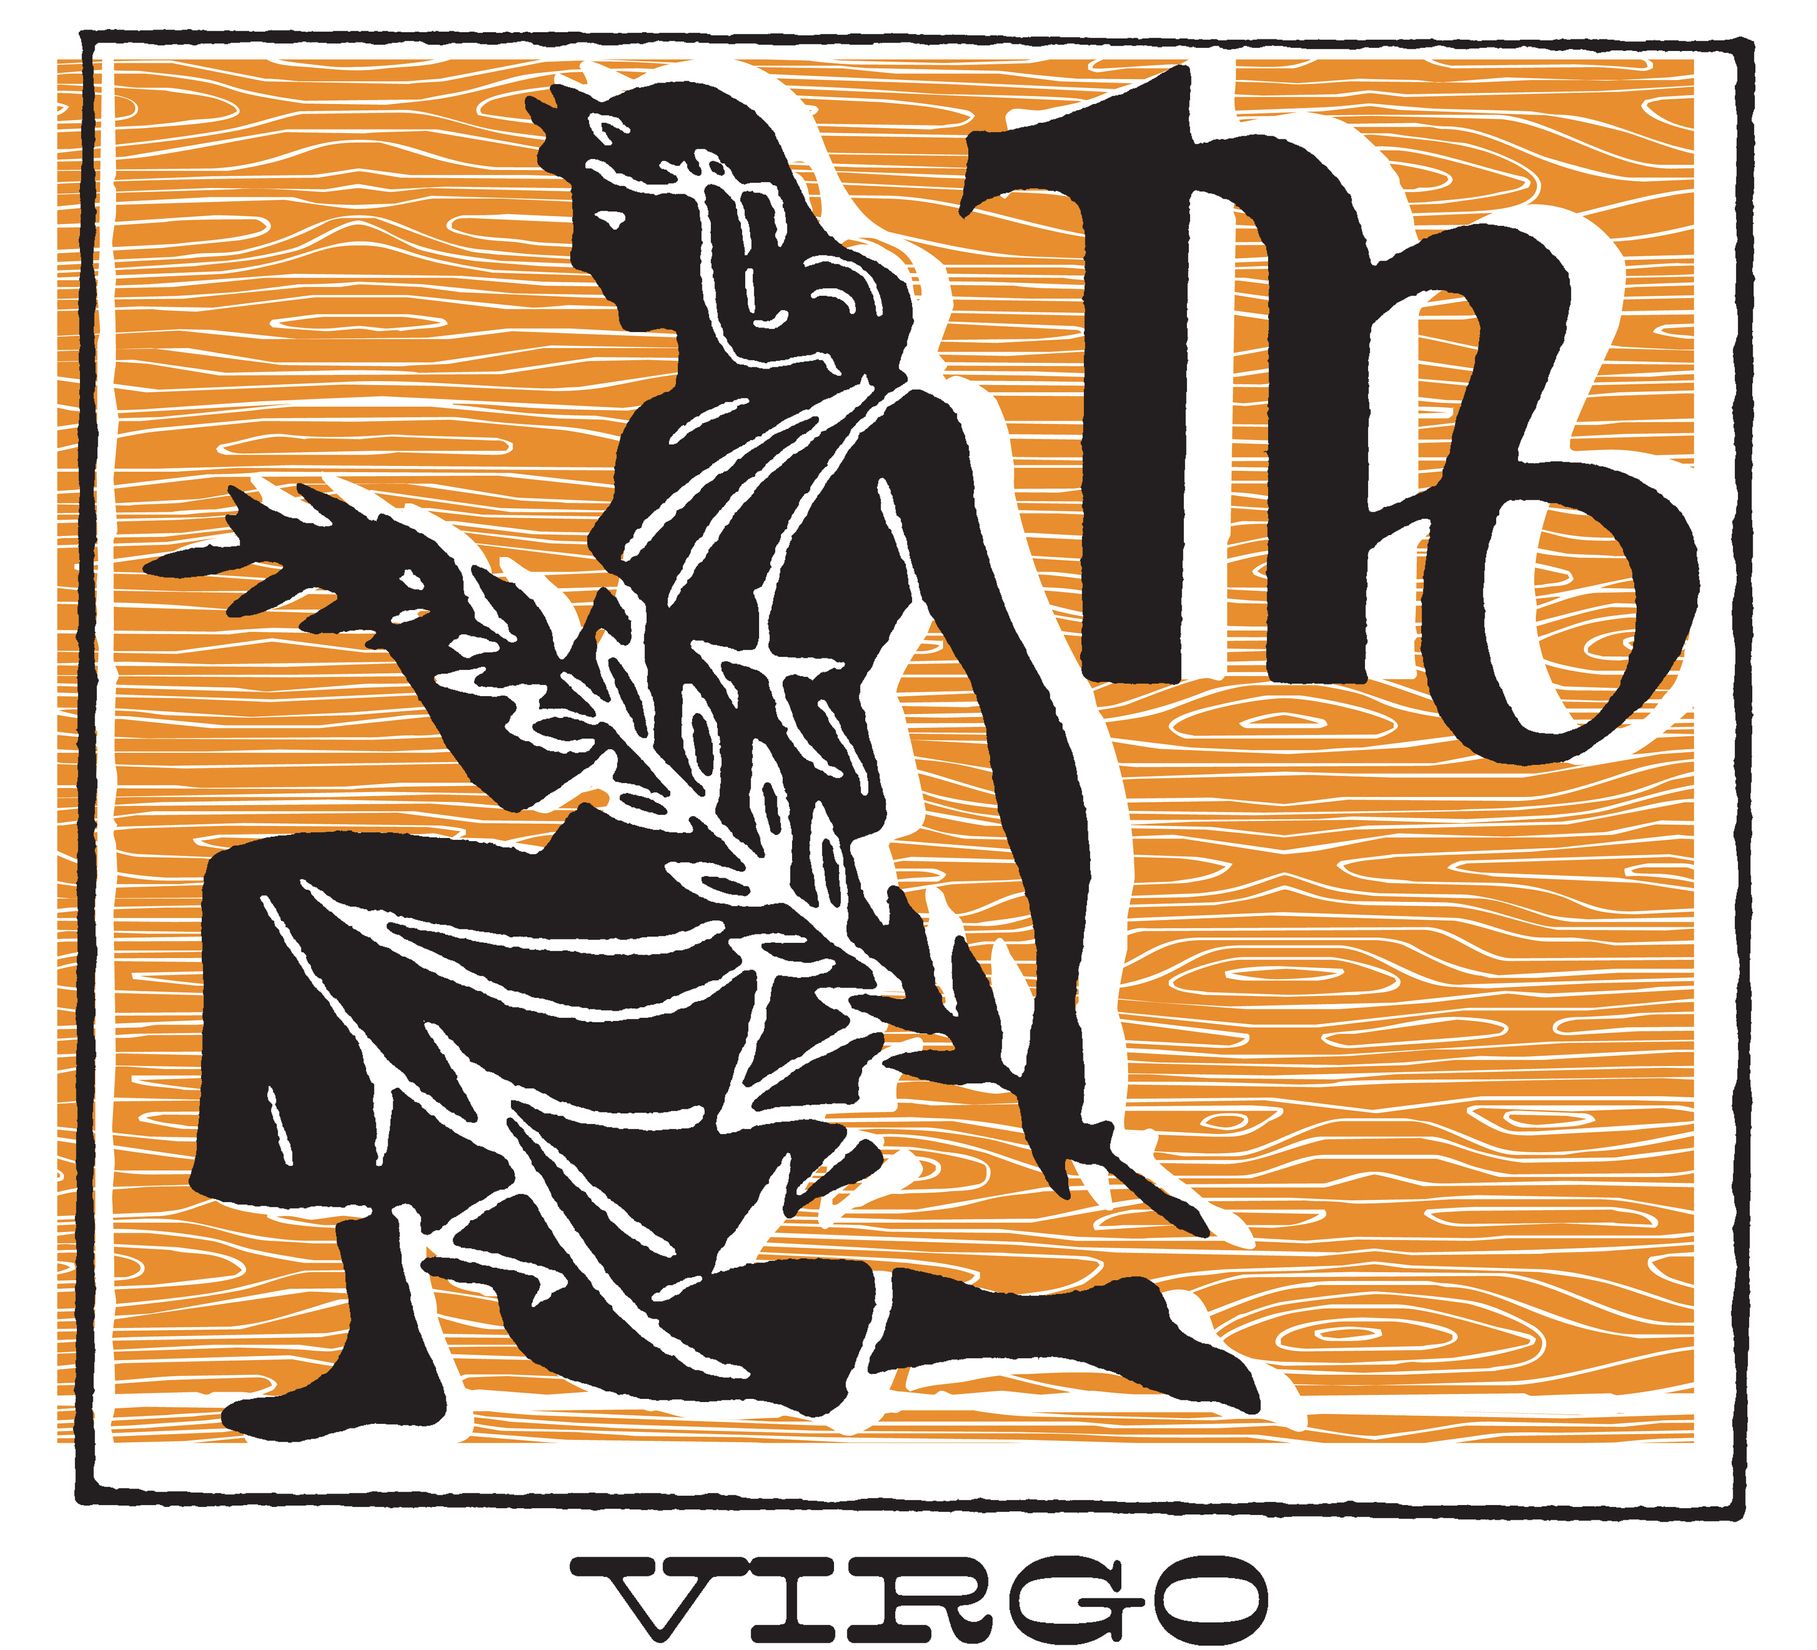 An image of the Virgo zodiac sign. | Source: Getty Images